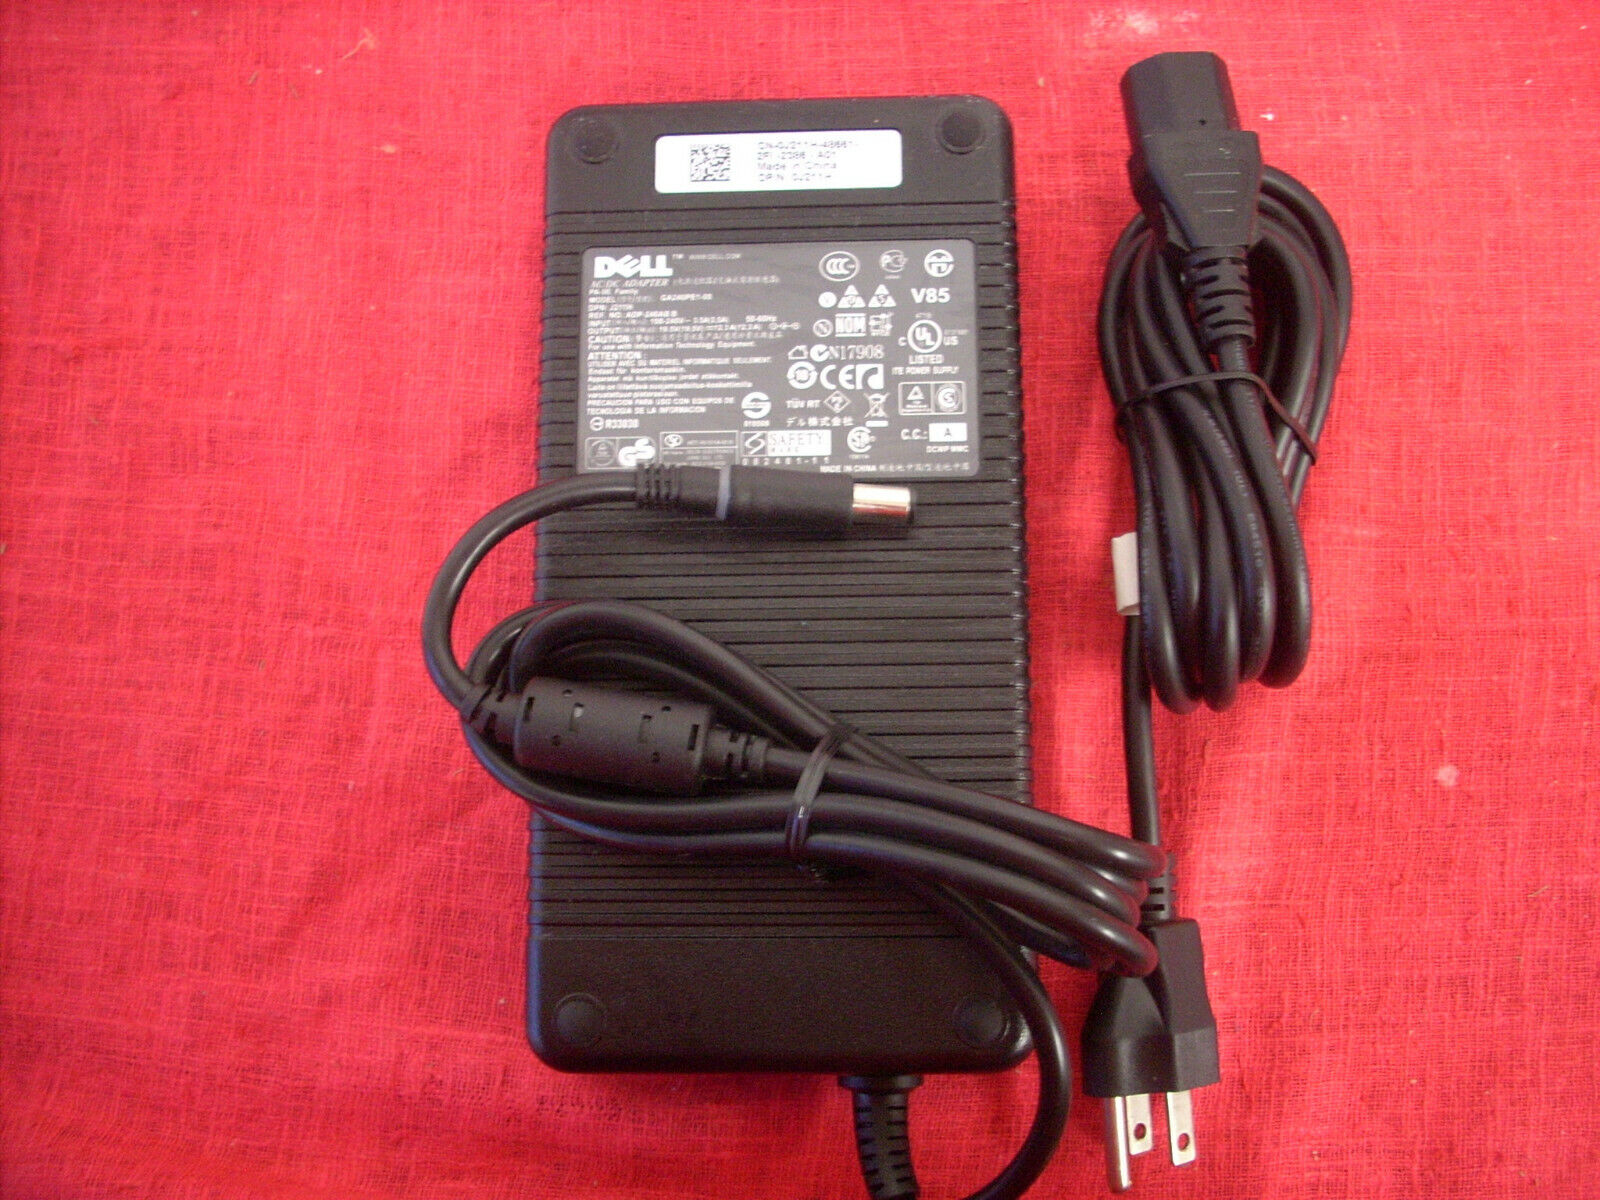 Original Genuine OEM Dell Alienware 17 R3 R4 R5 Power Adapter Charger/Cord 240W